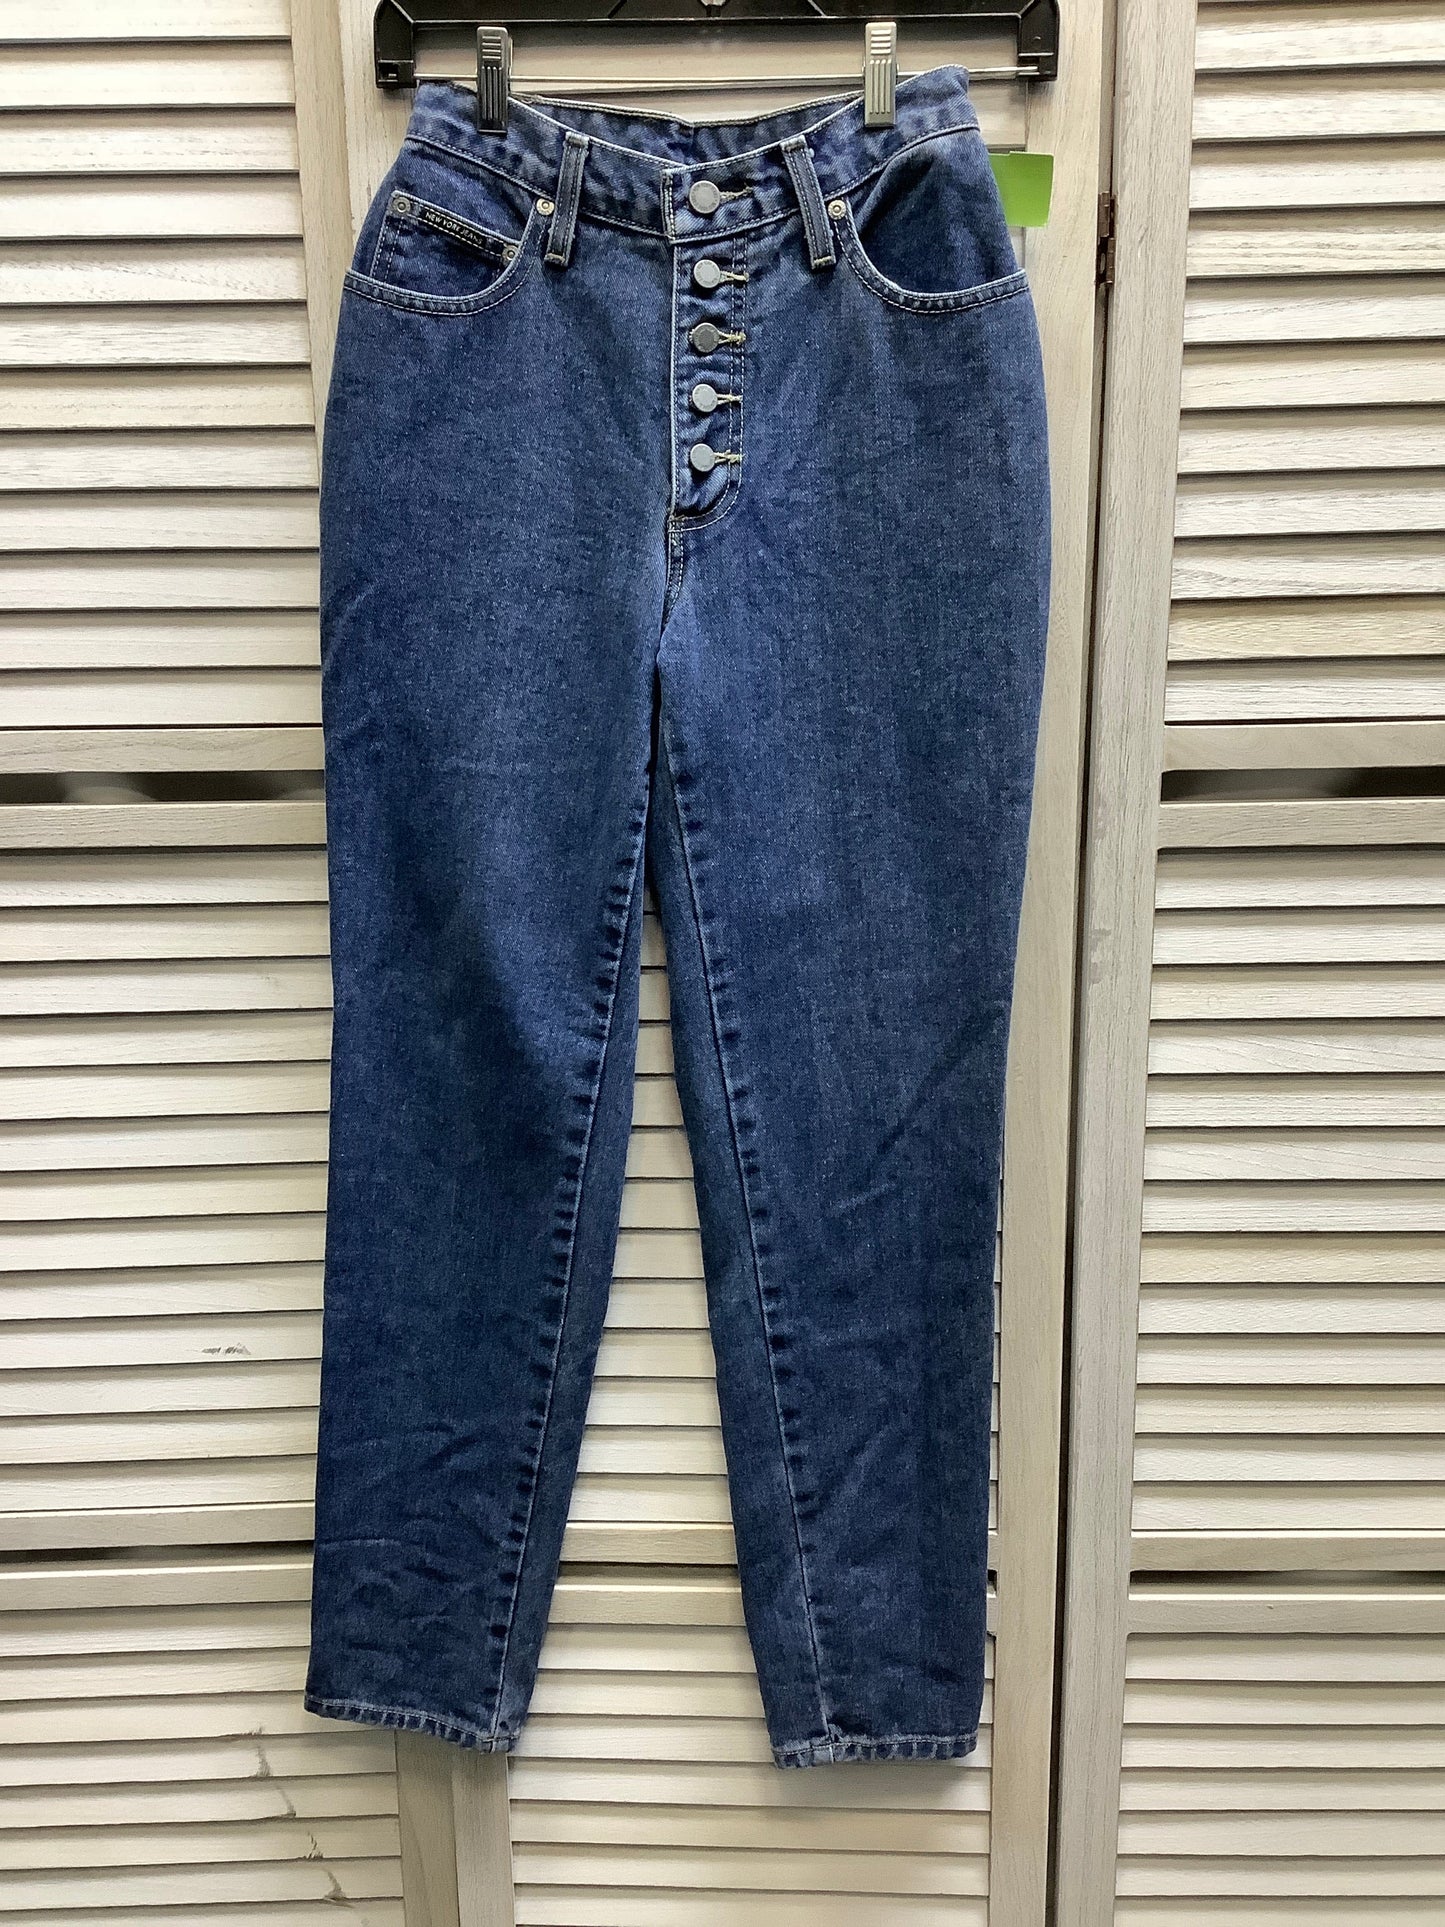 Blue Denim Jeans Straight New York And Co, Size 4